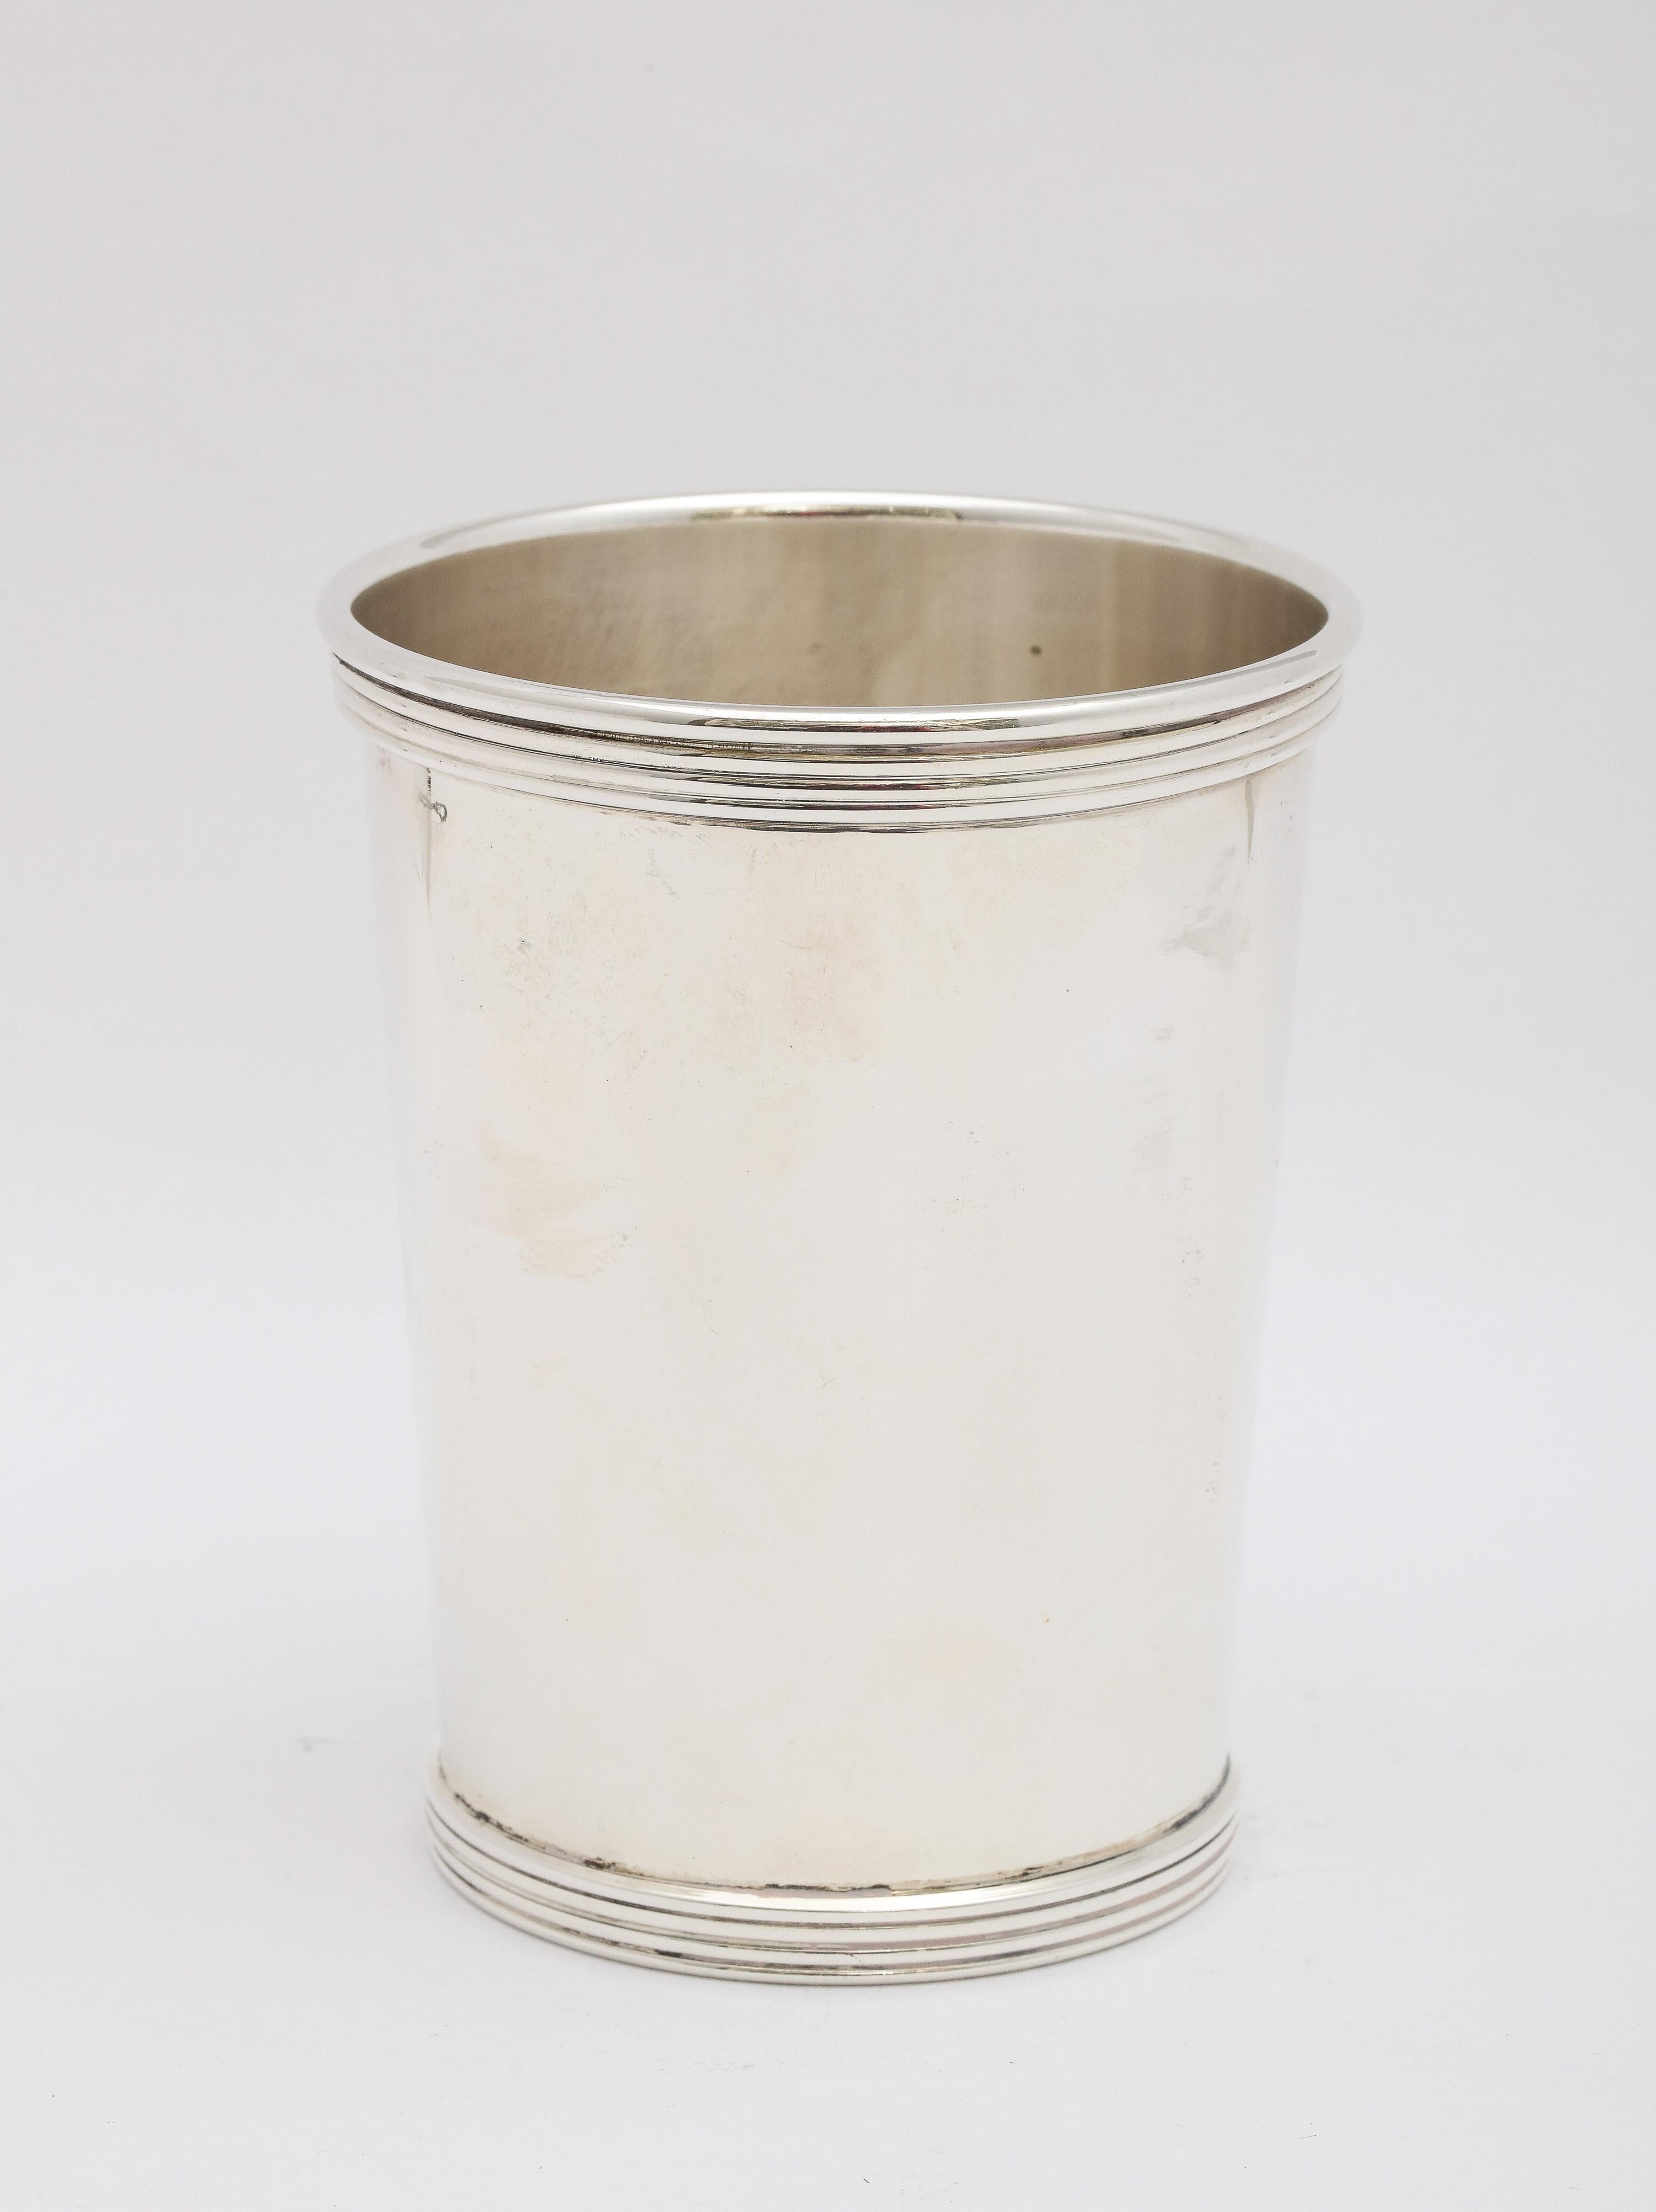 Art Deco Period Sterling Silver Mint Julep Cup In Good Condition For Sale In New York, NY